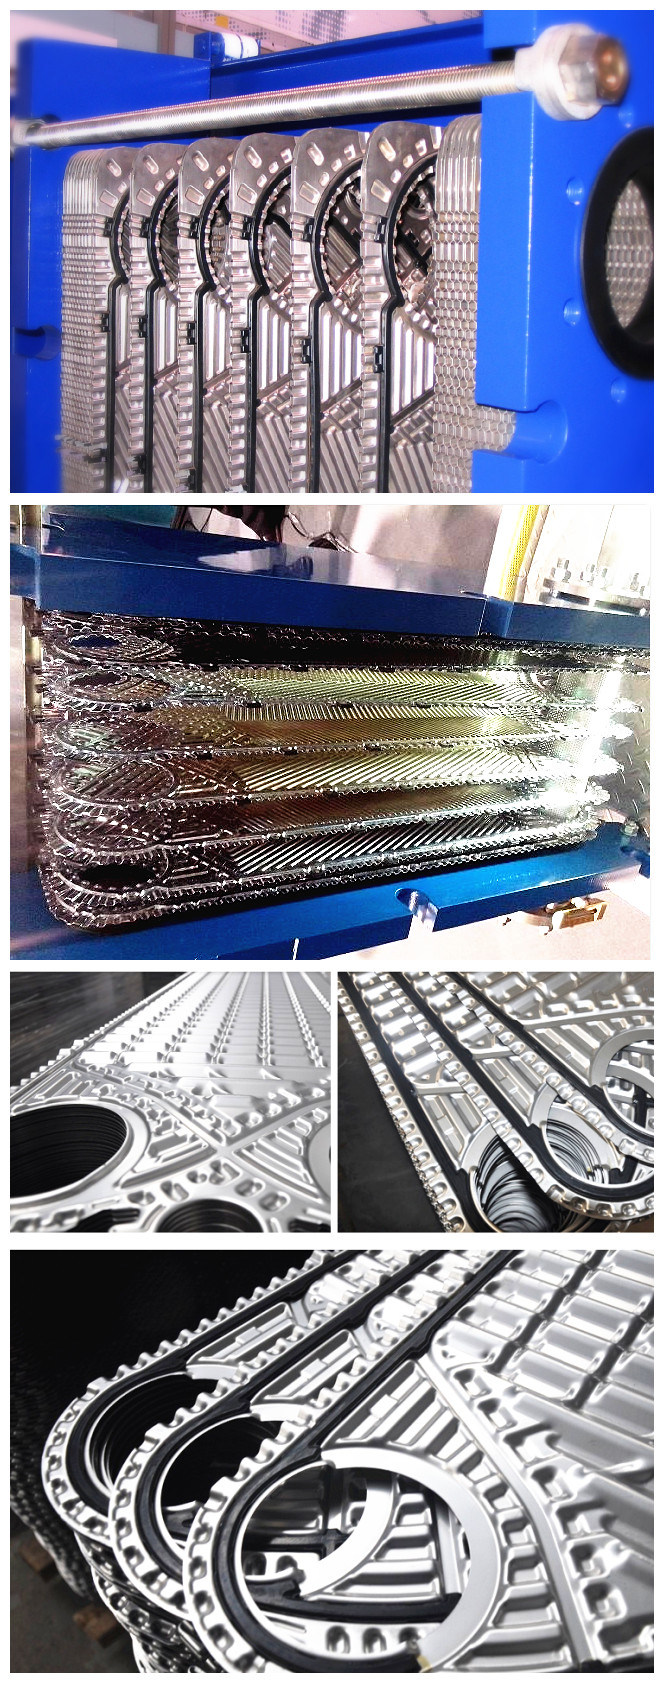 Replace Apv Plate Heat Exchanger Calculation, Heat Exchanger Plate, Heat Exchanger Sr1/Sr2/3/6/9/23/14/15/N25/N35/N50/N60/N92/M107/M185